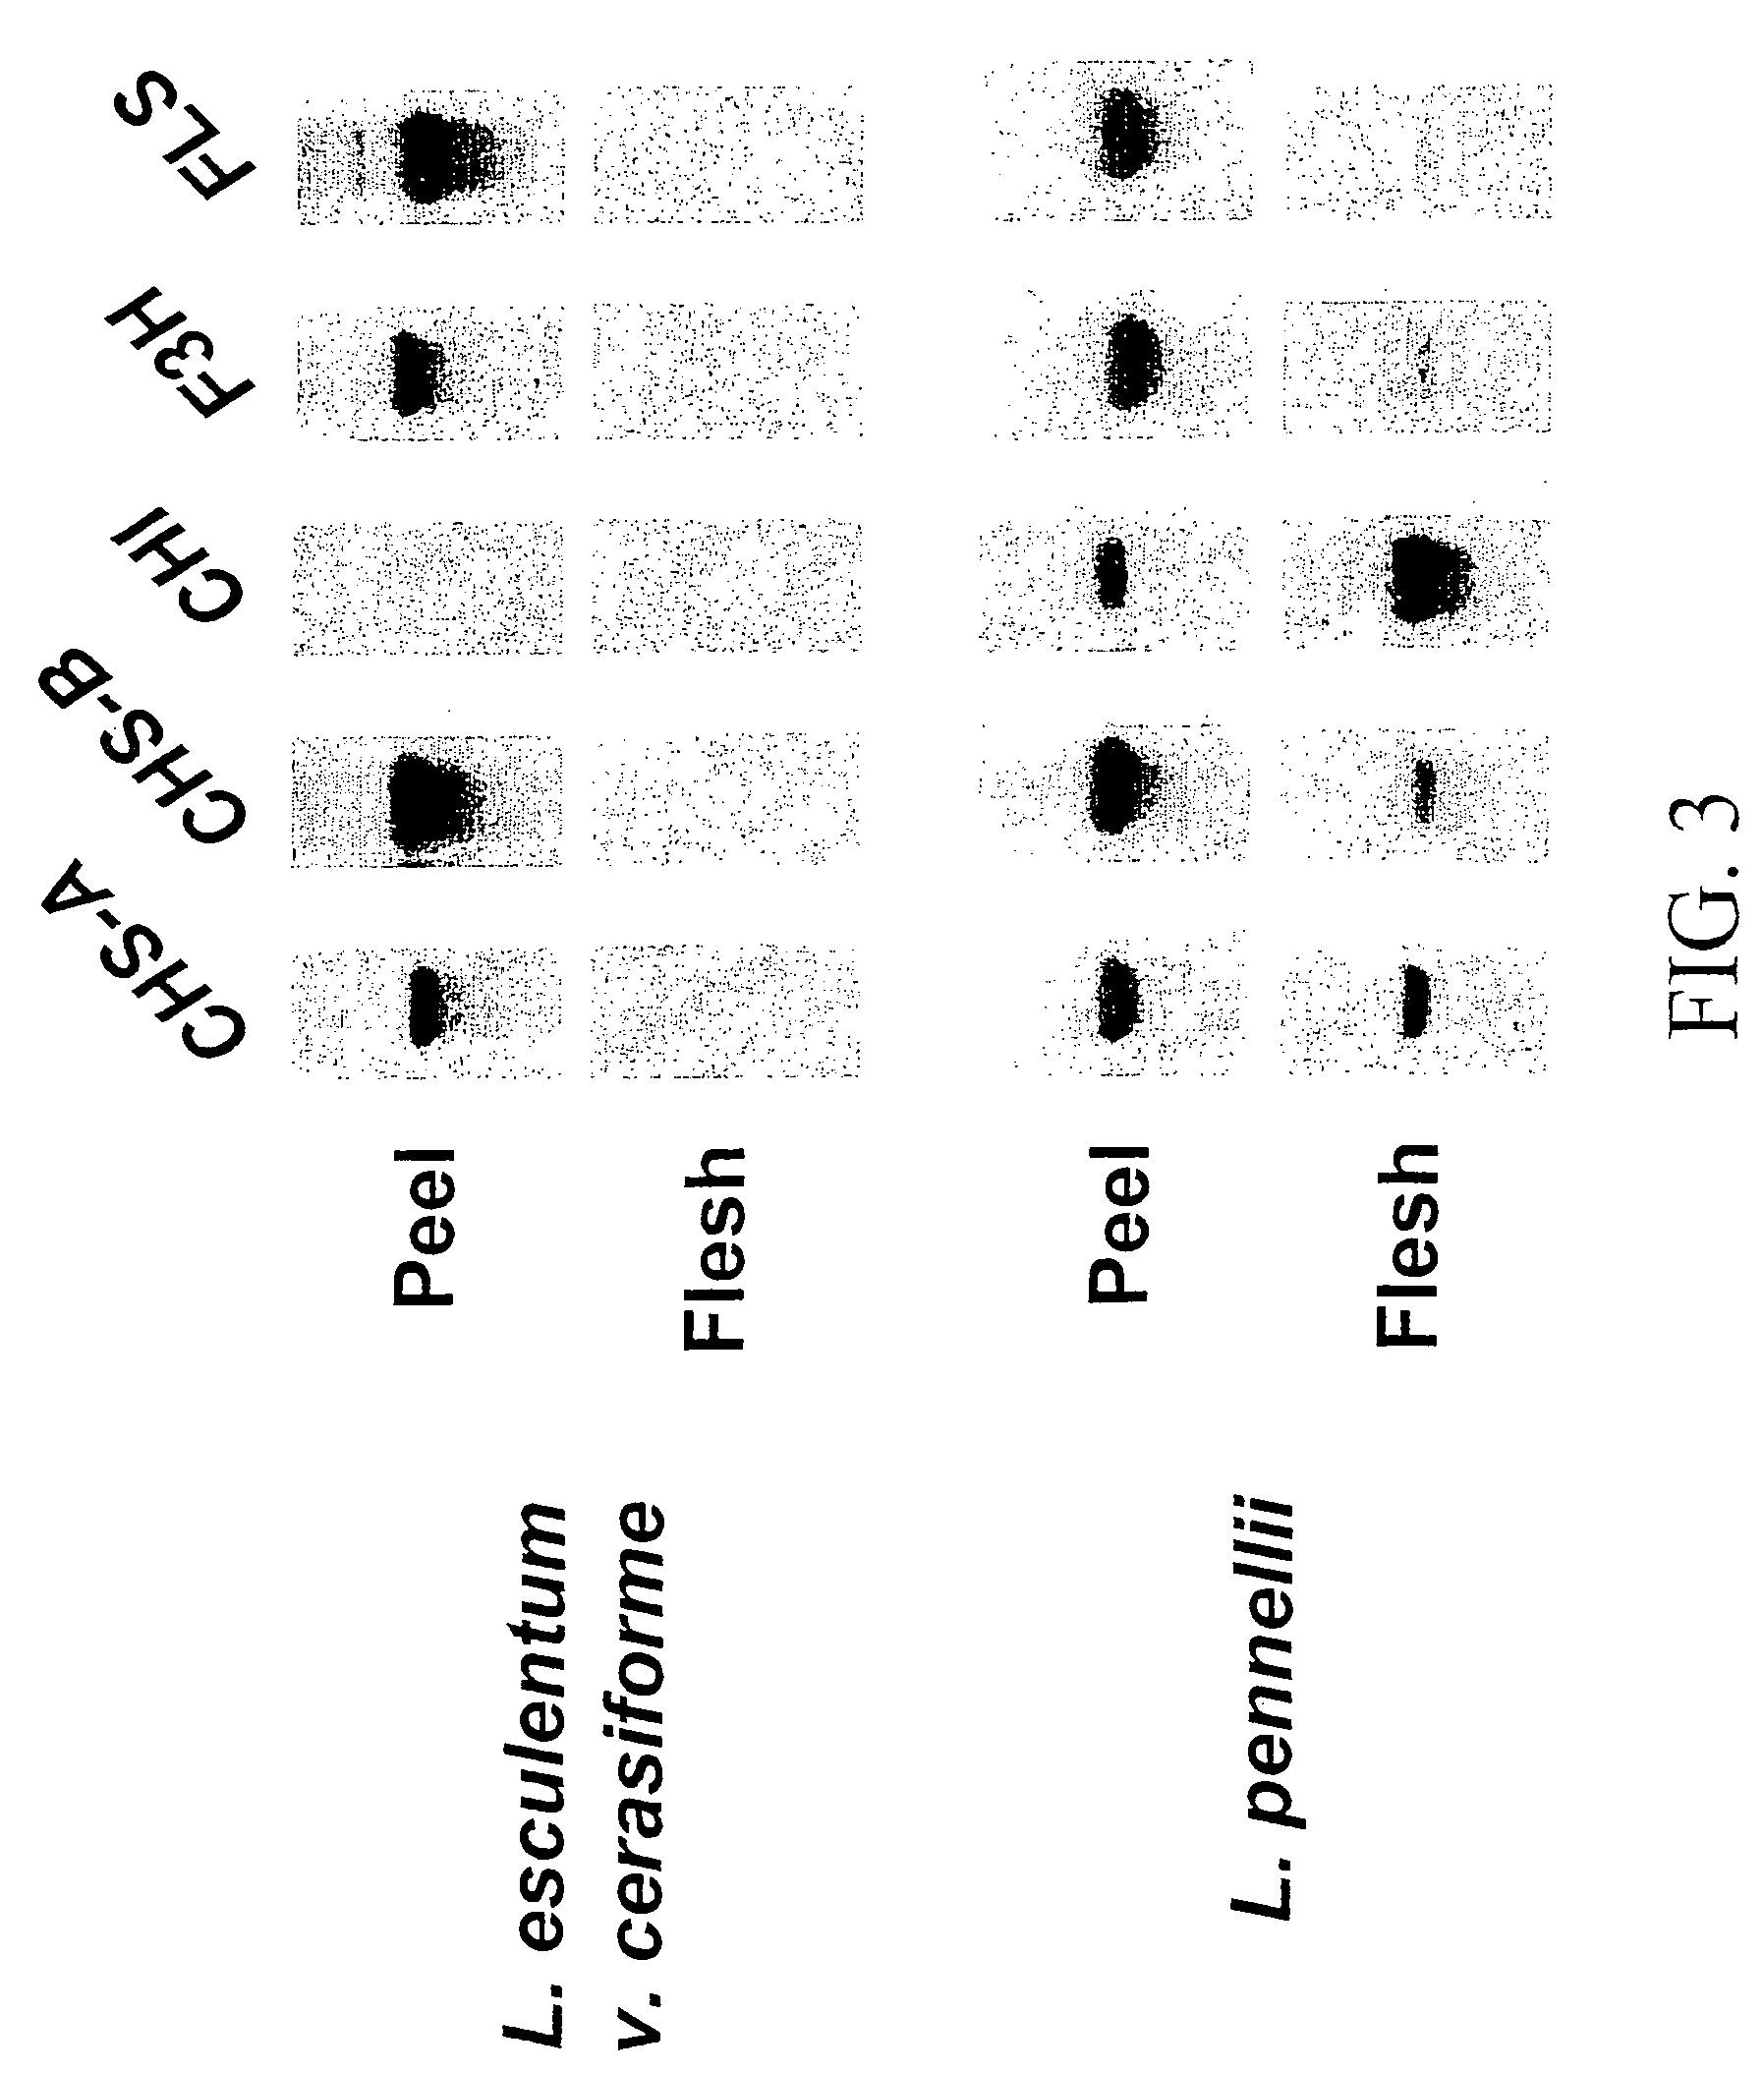 Flavonol expressing domesticated tomato and method of production